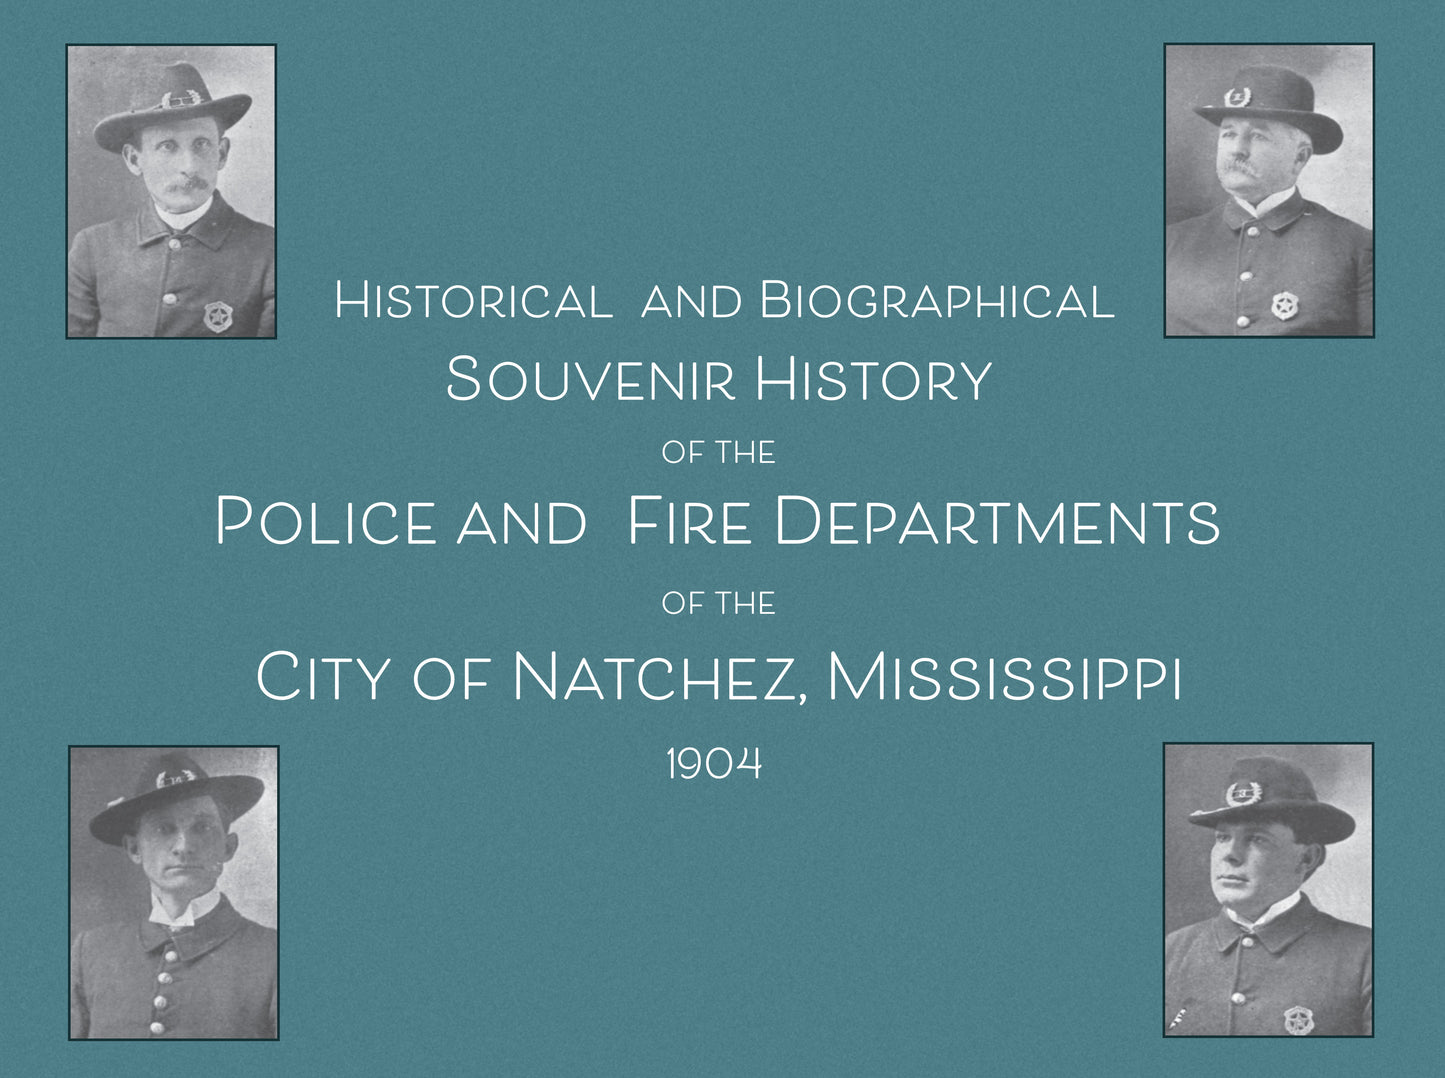 Historical and Biographical Souvenir History of the Police and Fire Departments of the City of Natchez, MS